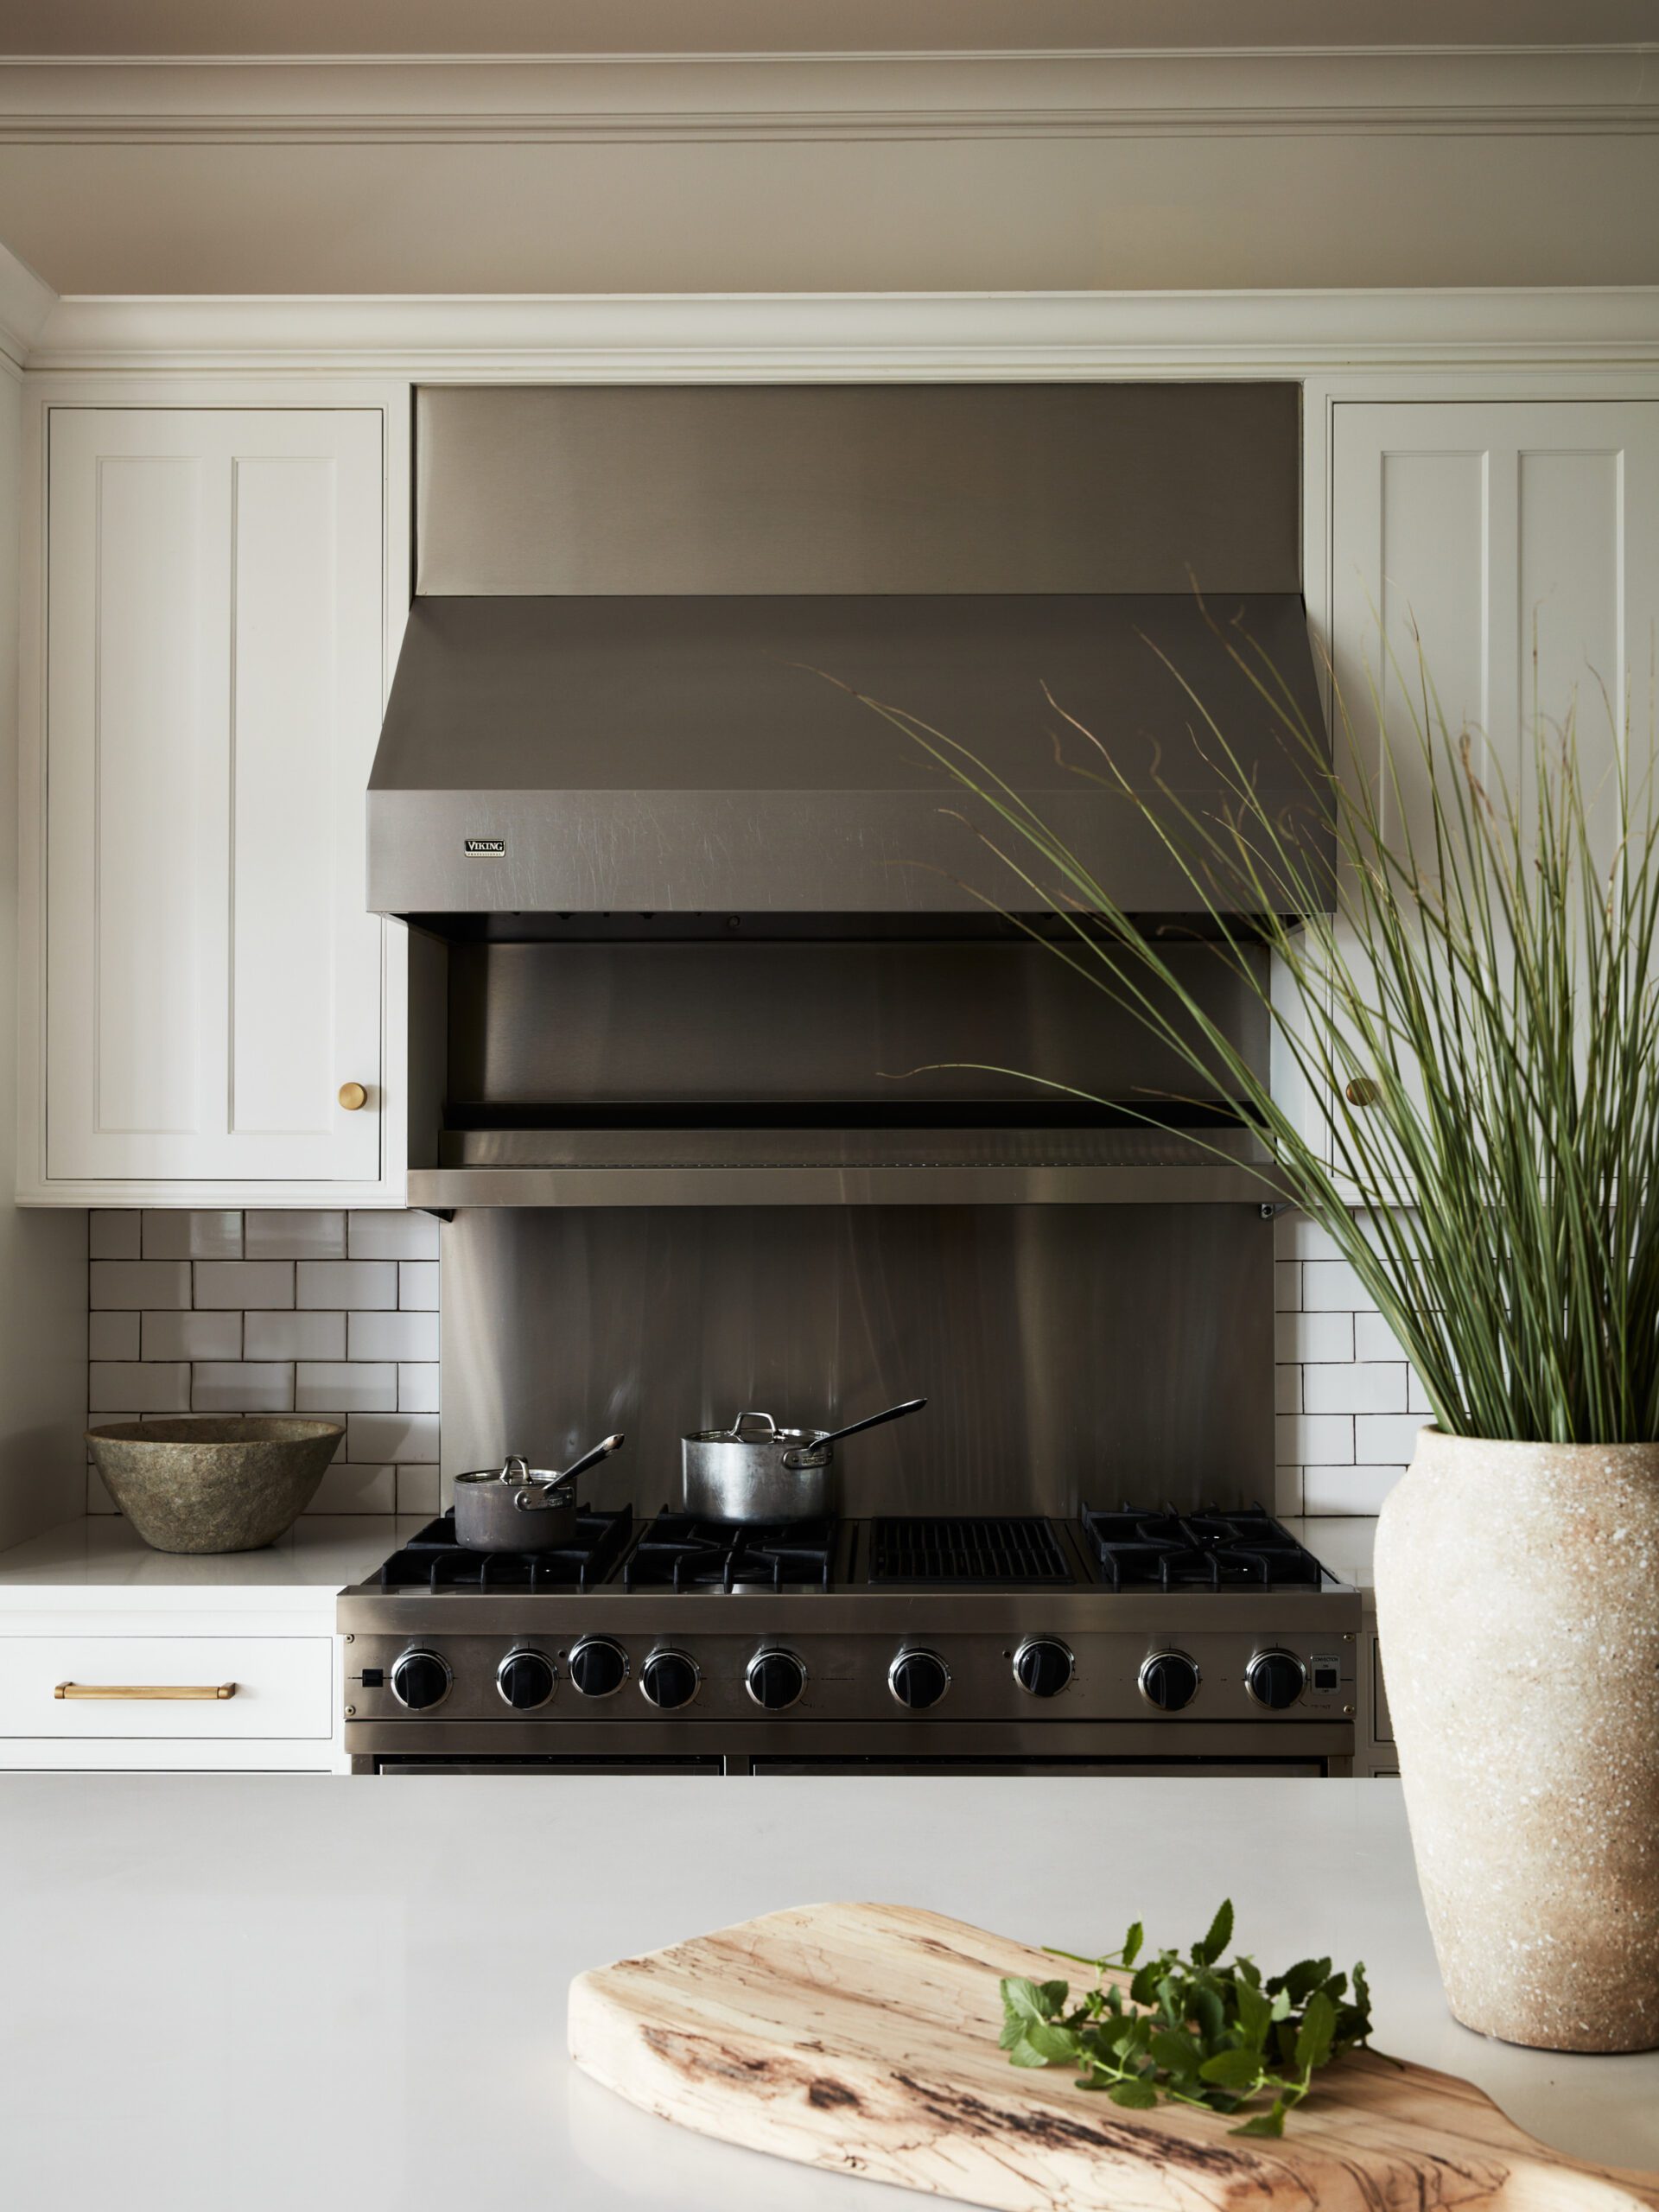 Oven and Island Details